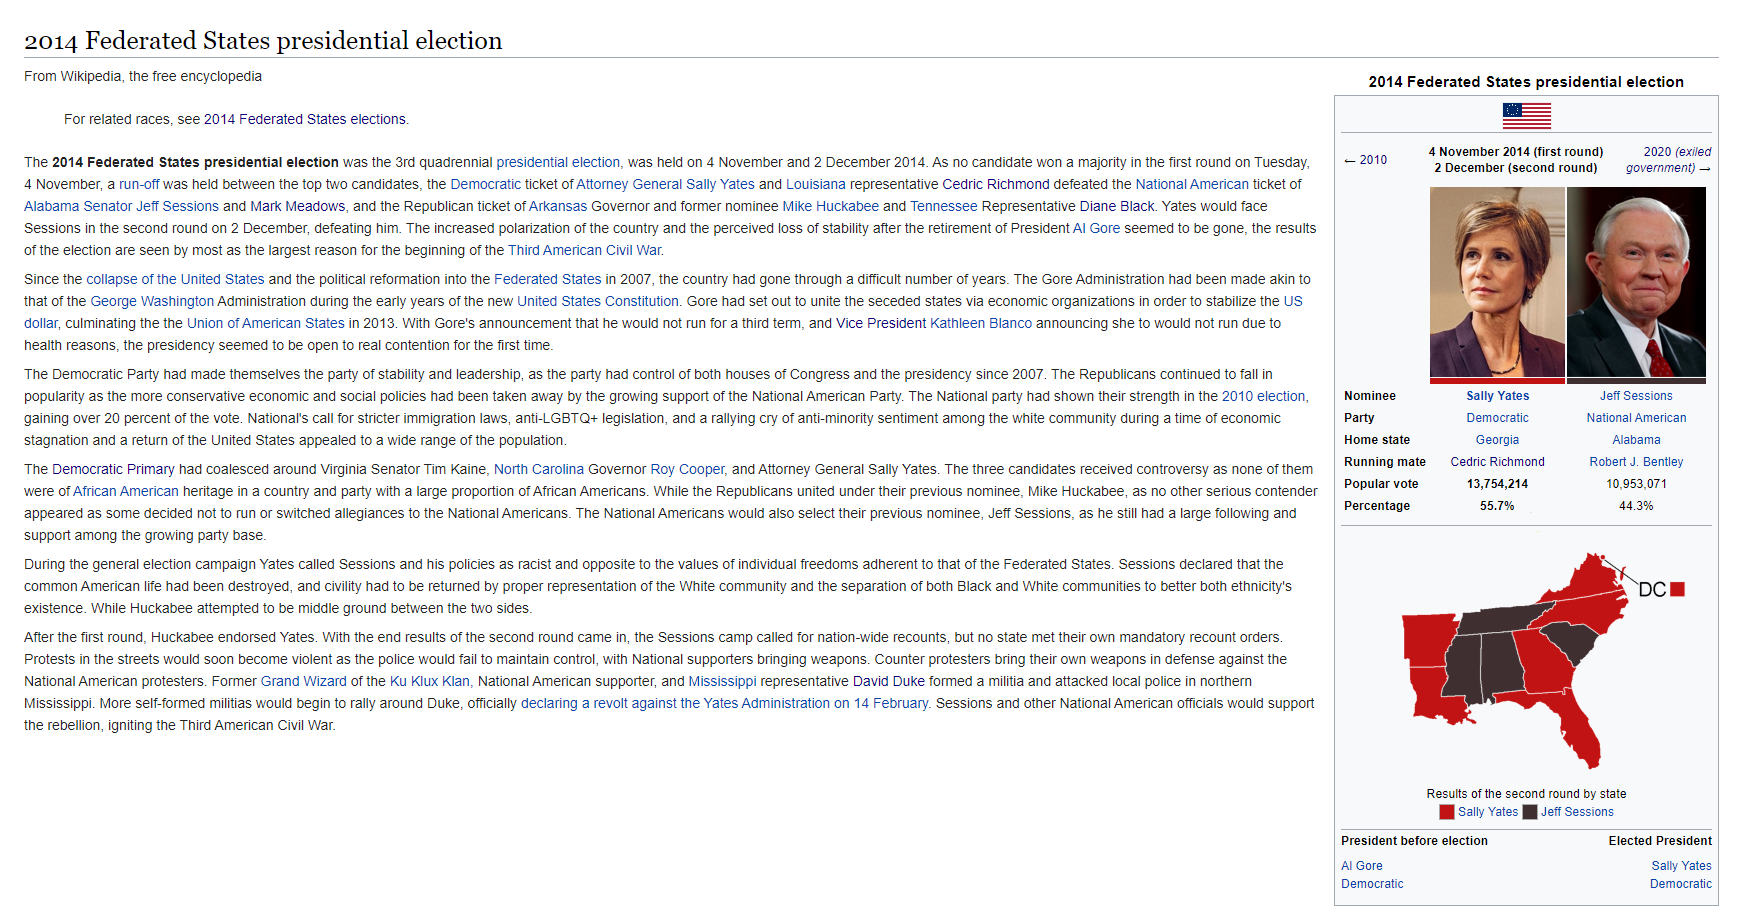 2014 Federated States presidential election wiki.png